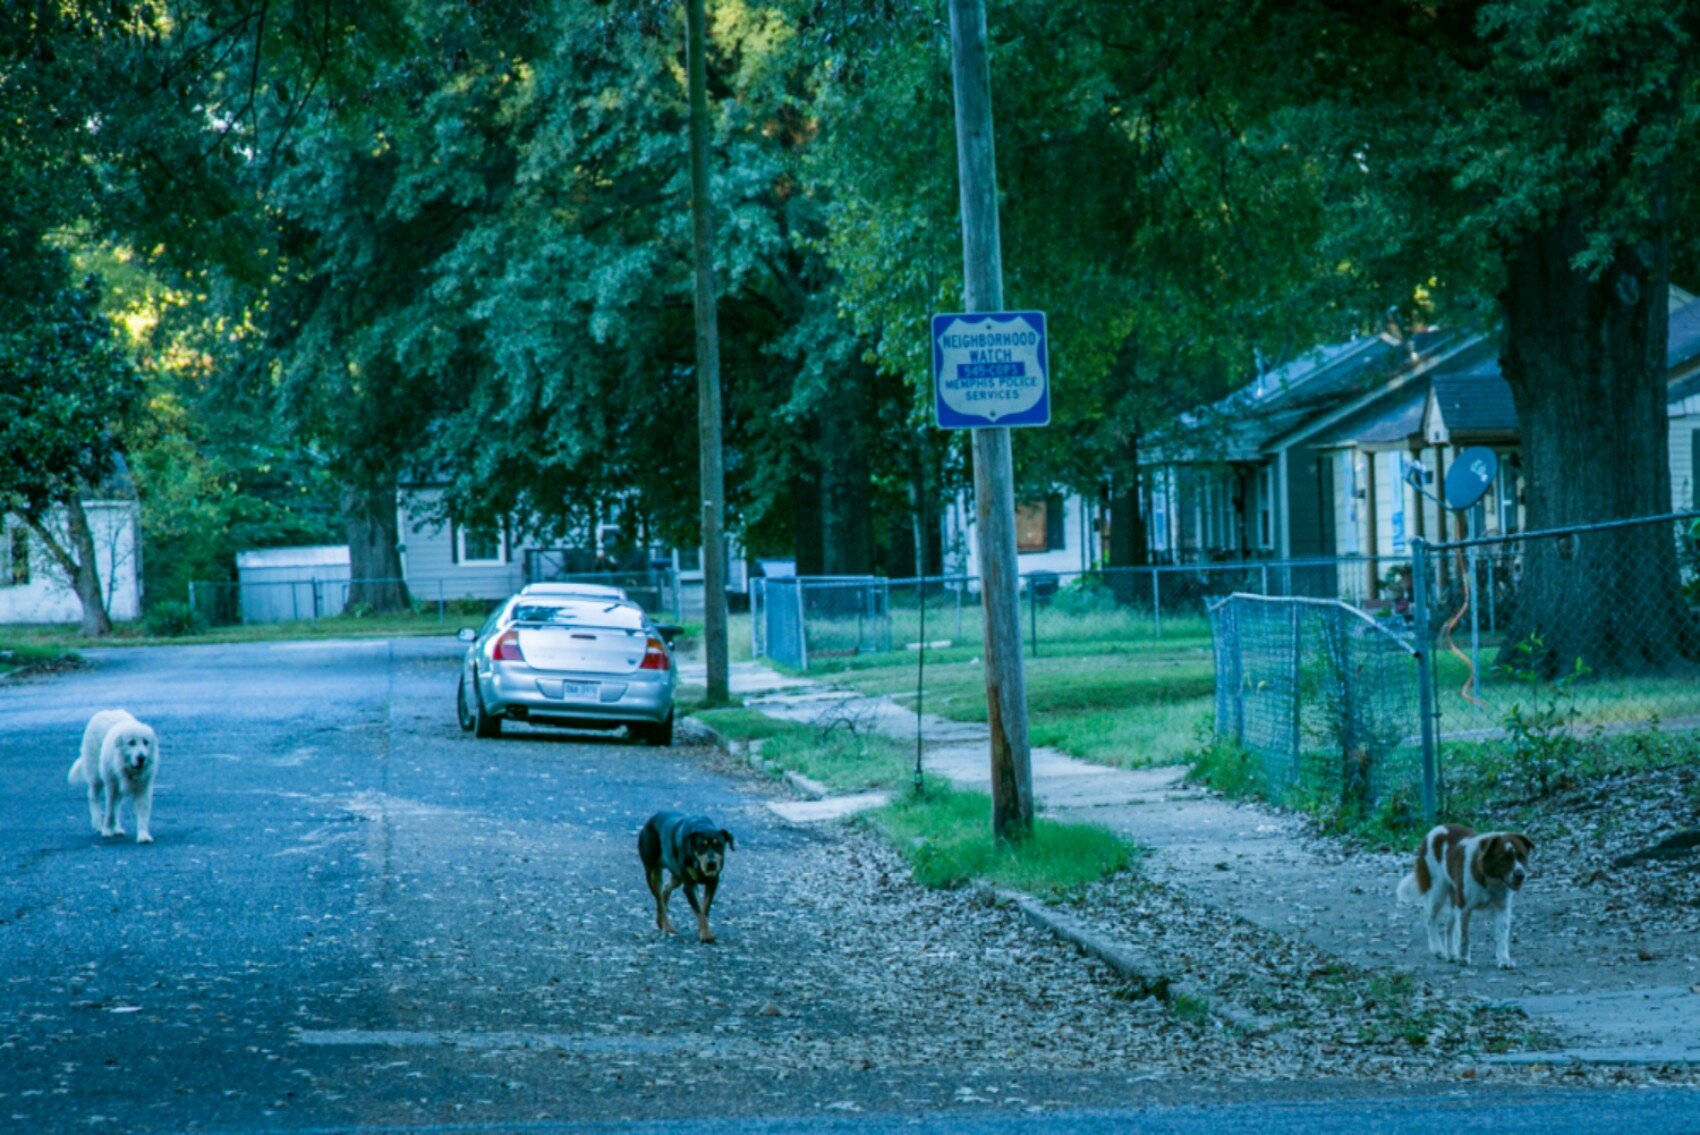 Stray dogs walk the streets in The Heights. (Natalie Eddings)